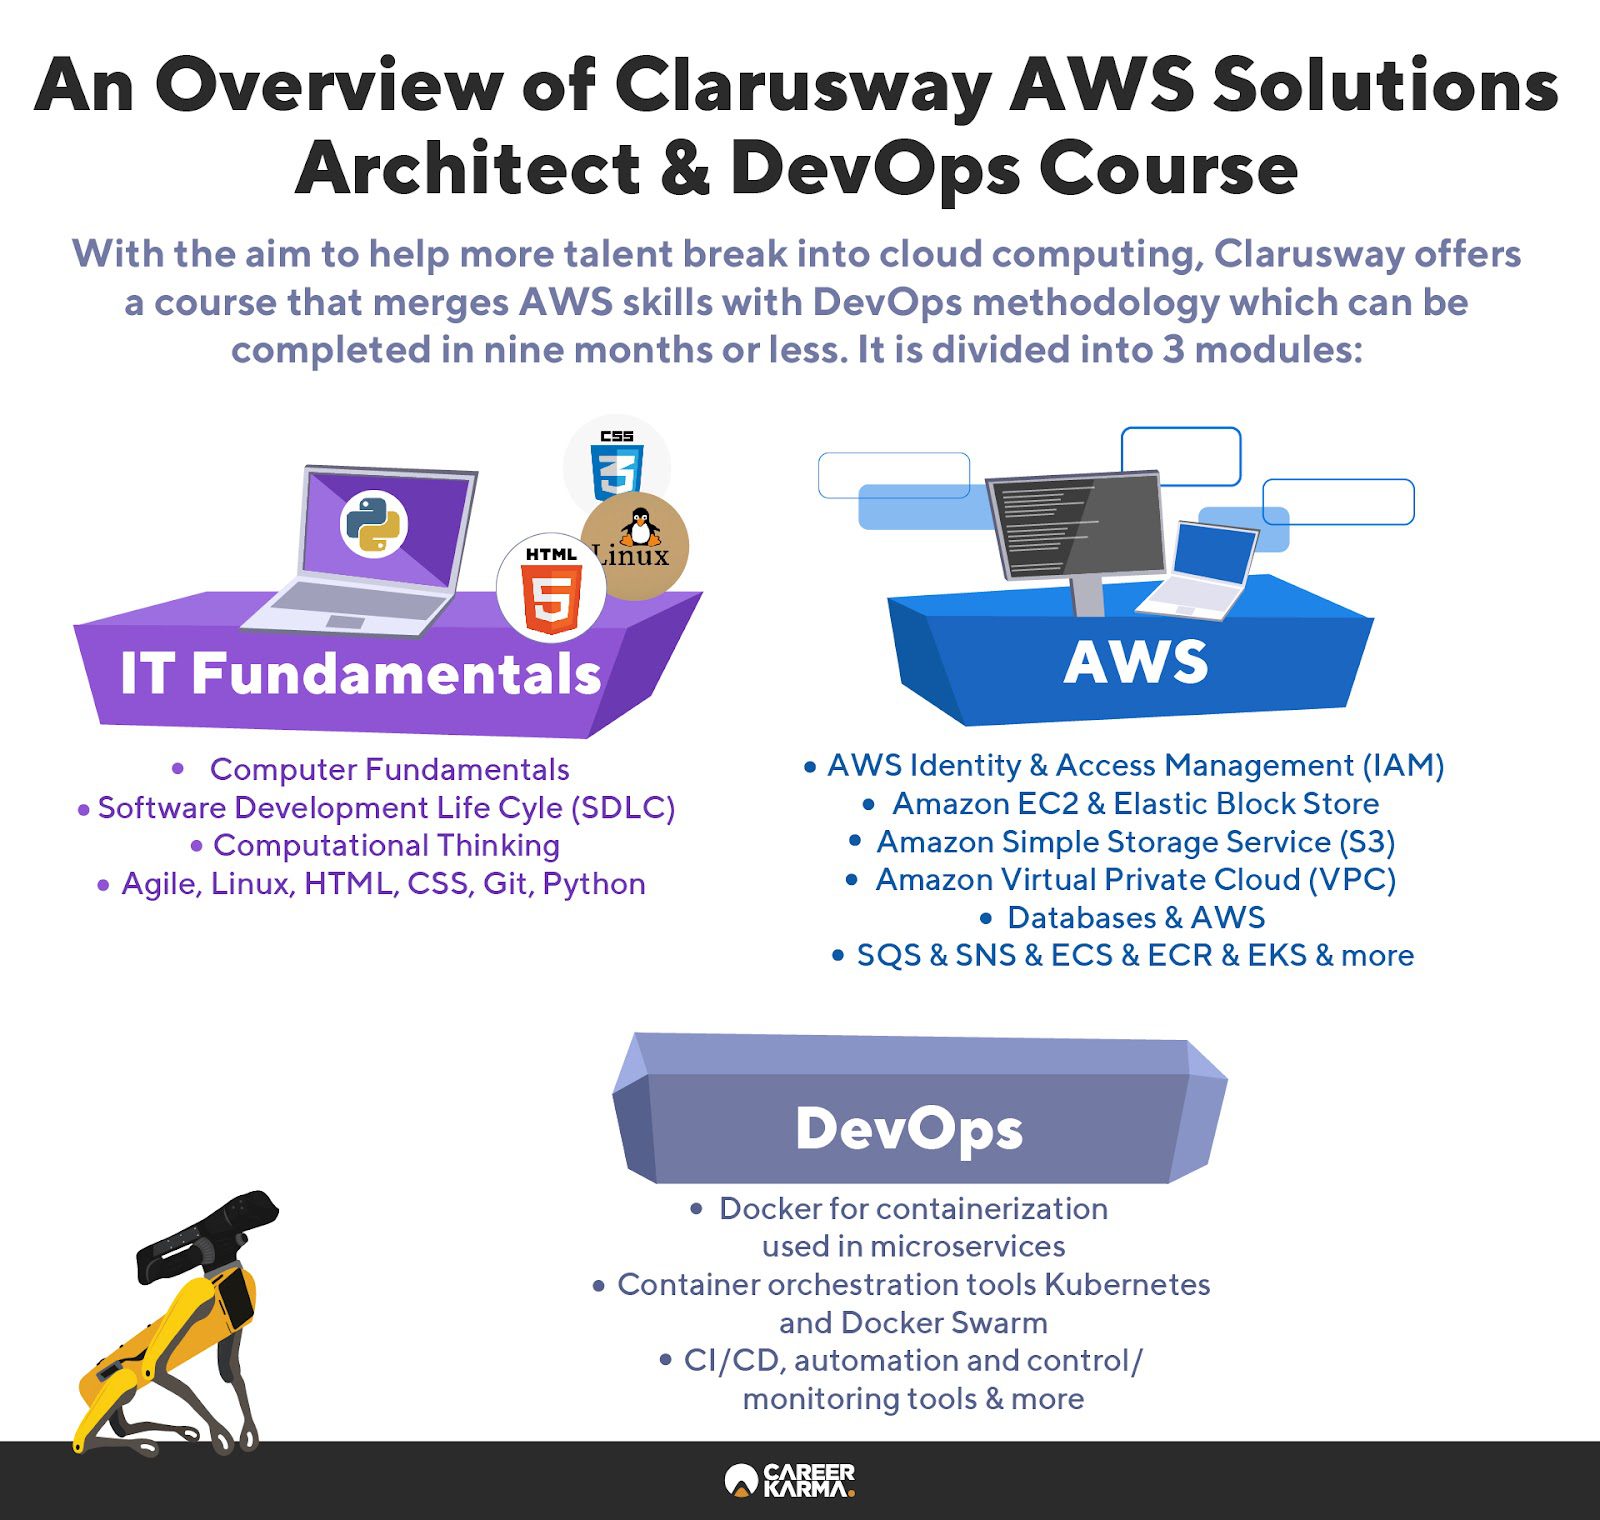 An infographic highlighting what you’ll learn from Clarusway’s AWS and DevOps course.